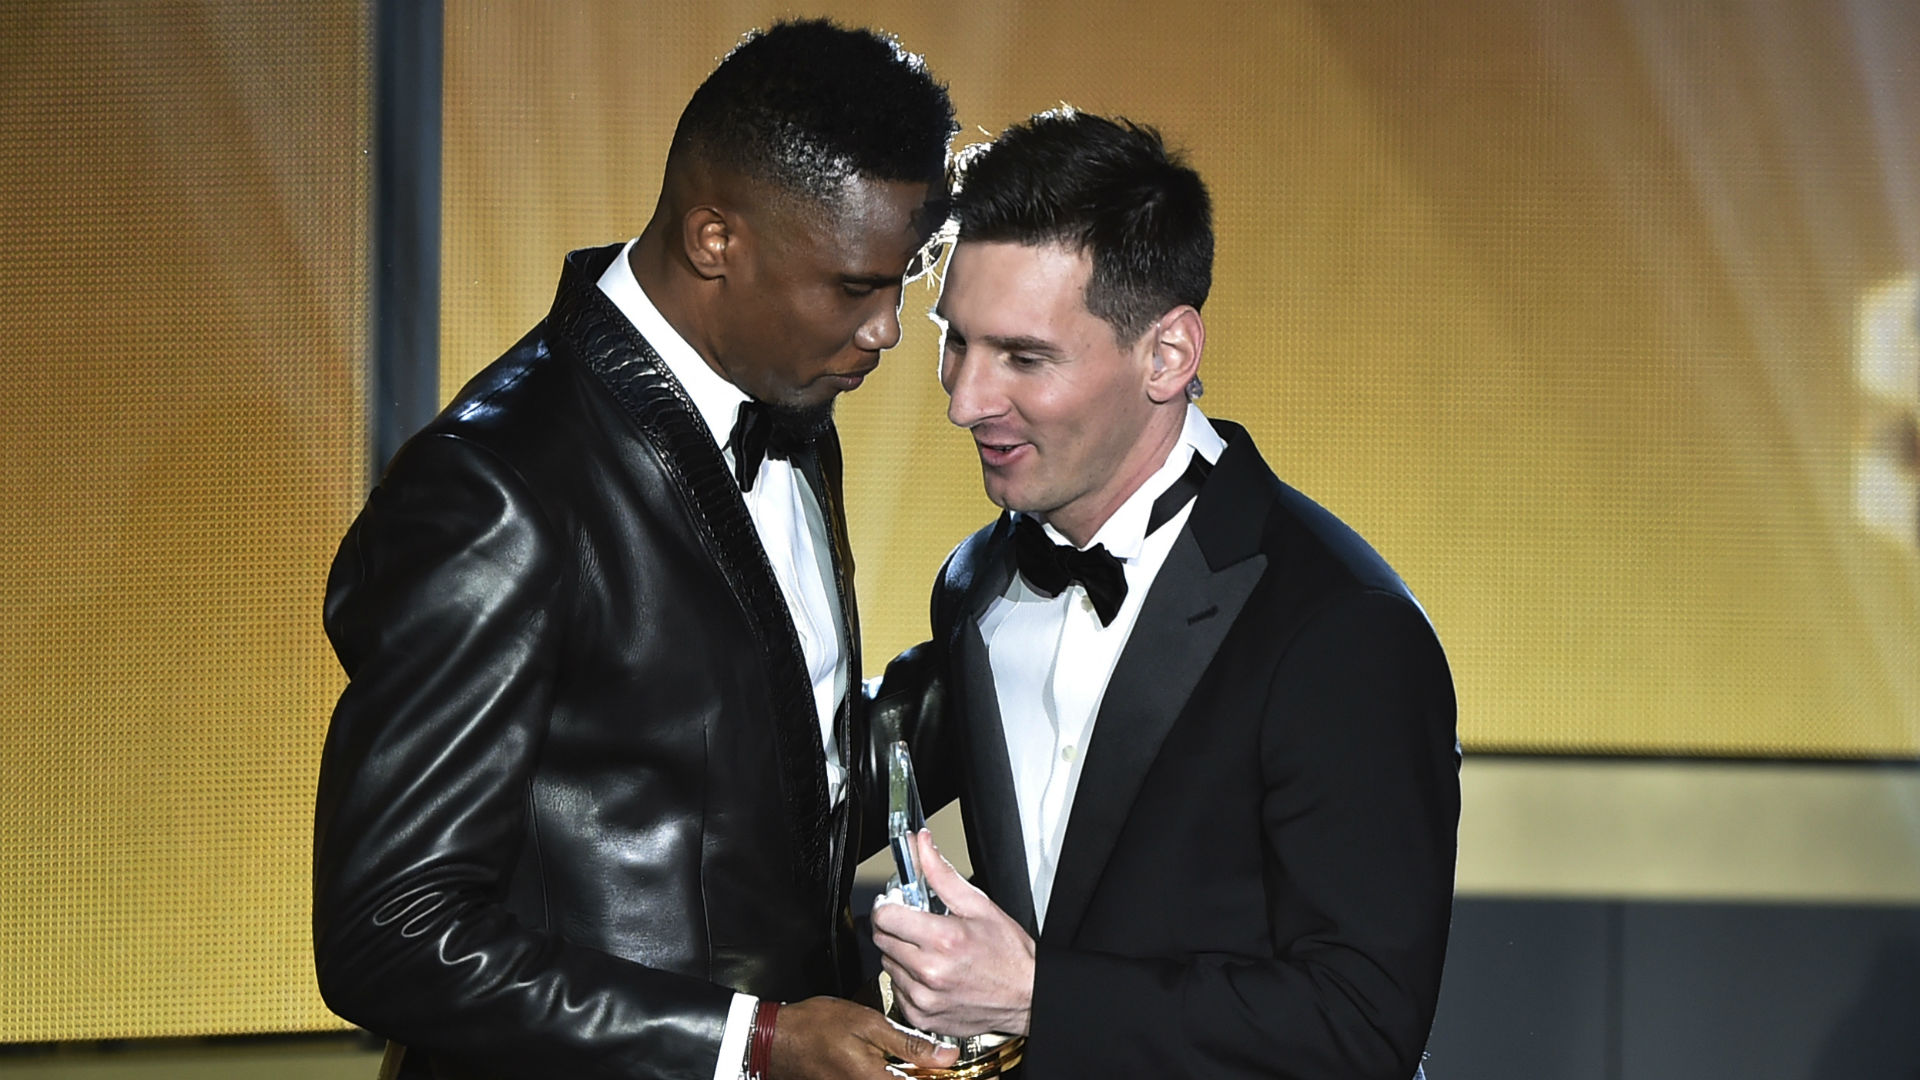 ‘Don’t cry son’ – Eto’o sends message to Messi after Barcelona exit